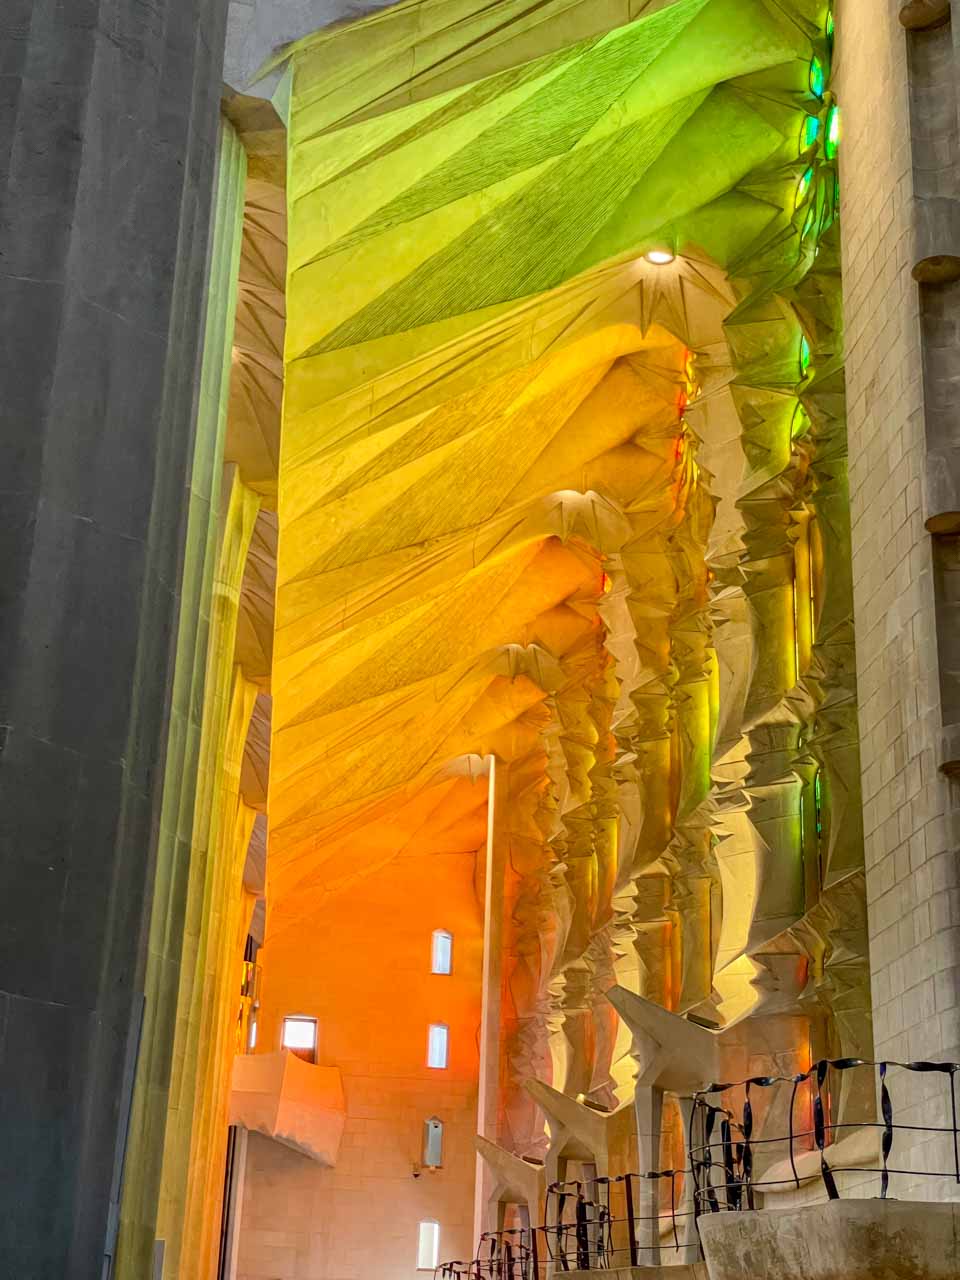 The light coming into the building from stained glass windows reflect orange, yellow, and green lights on the interior walls.